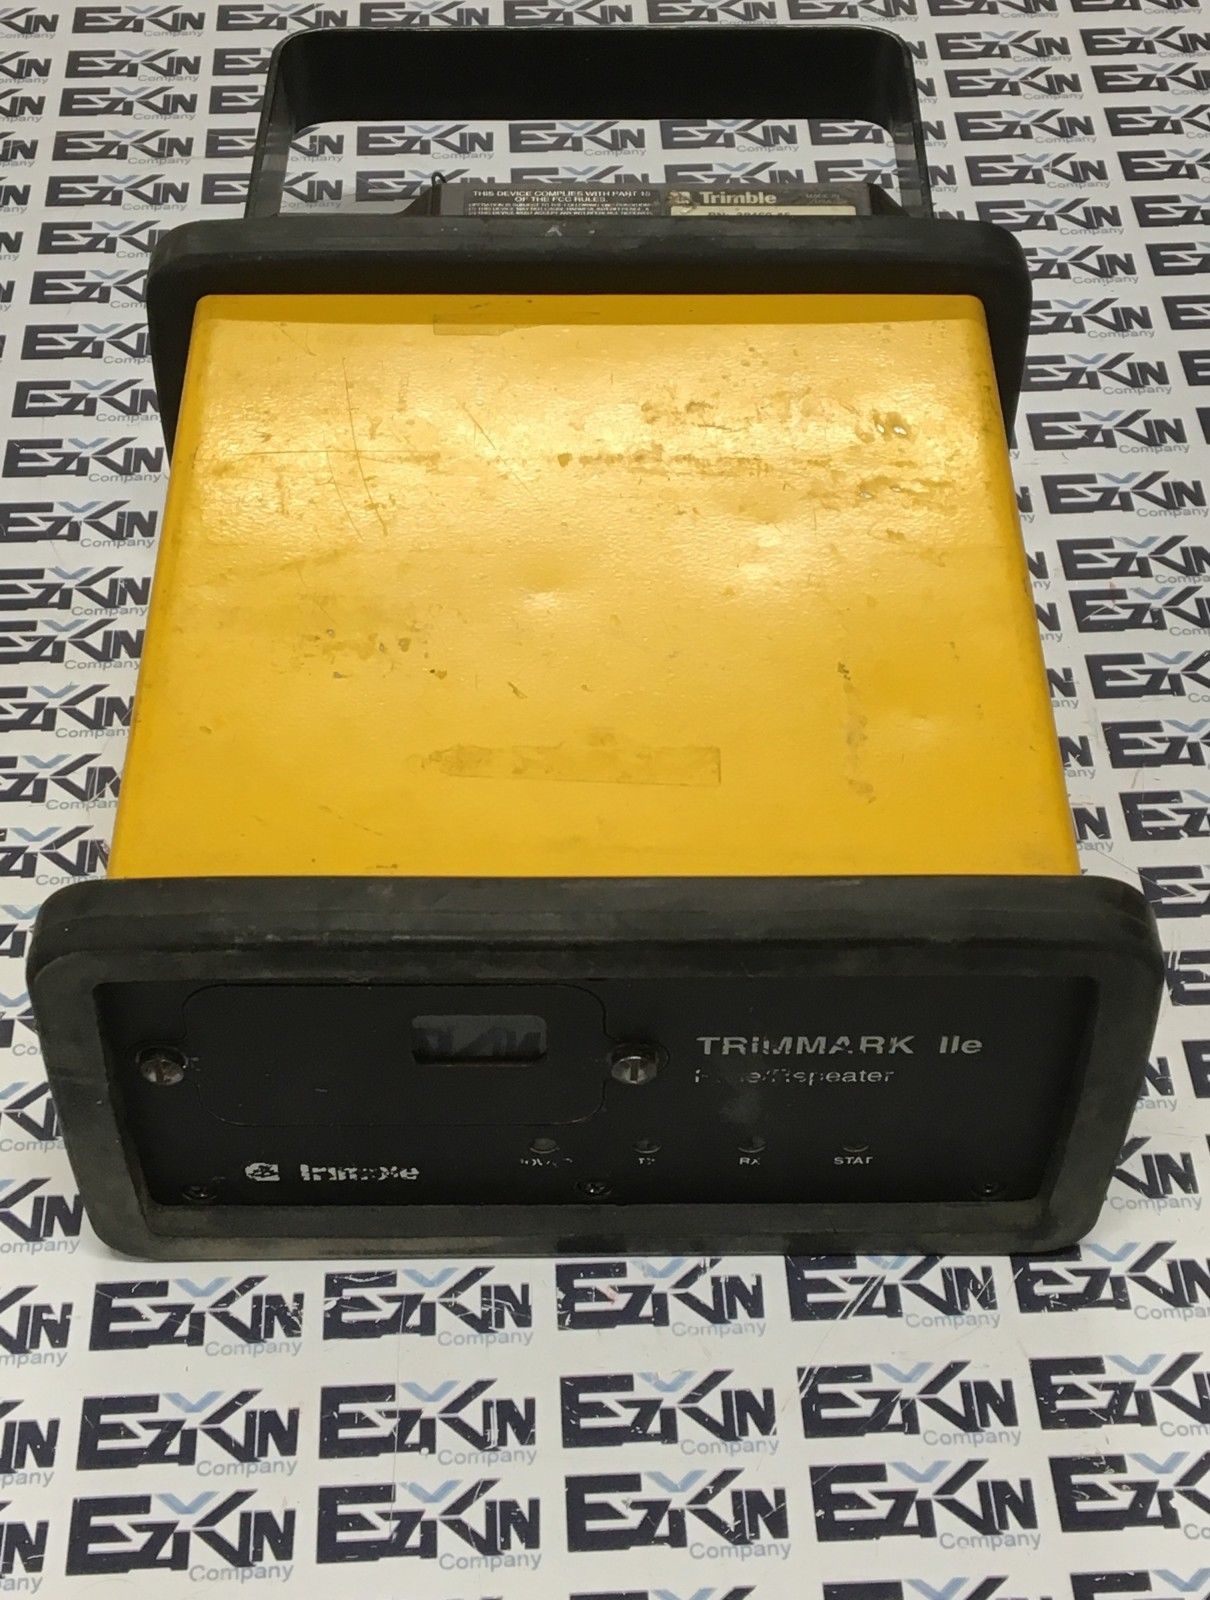 Trimble Trimmark IIe Radio 38460-45 Base Repeater 12.6v for sale online 